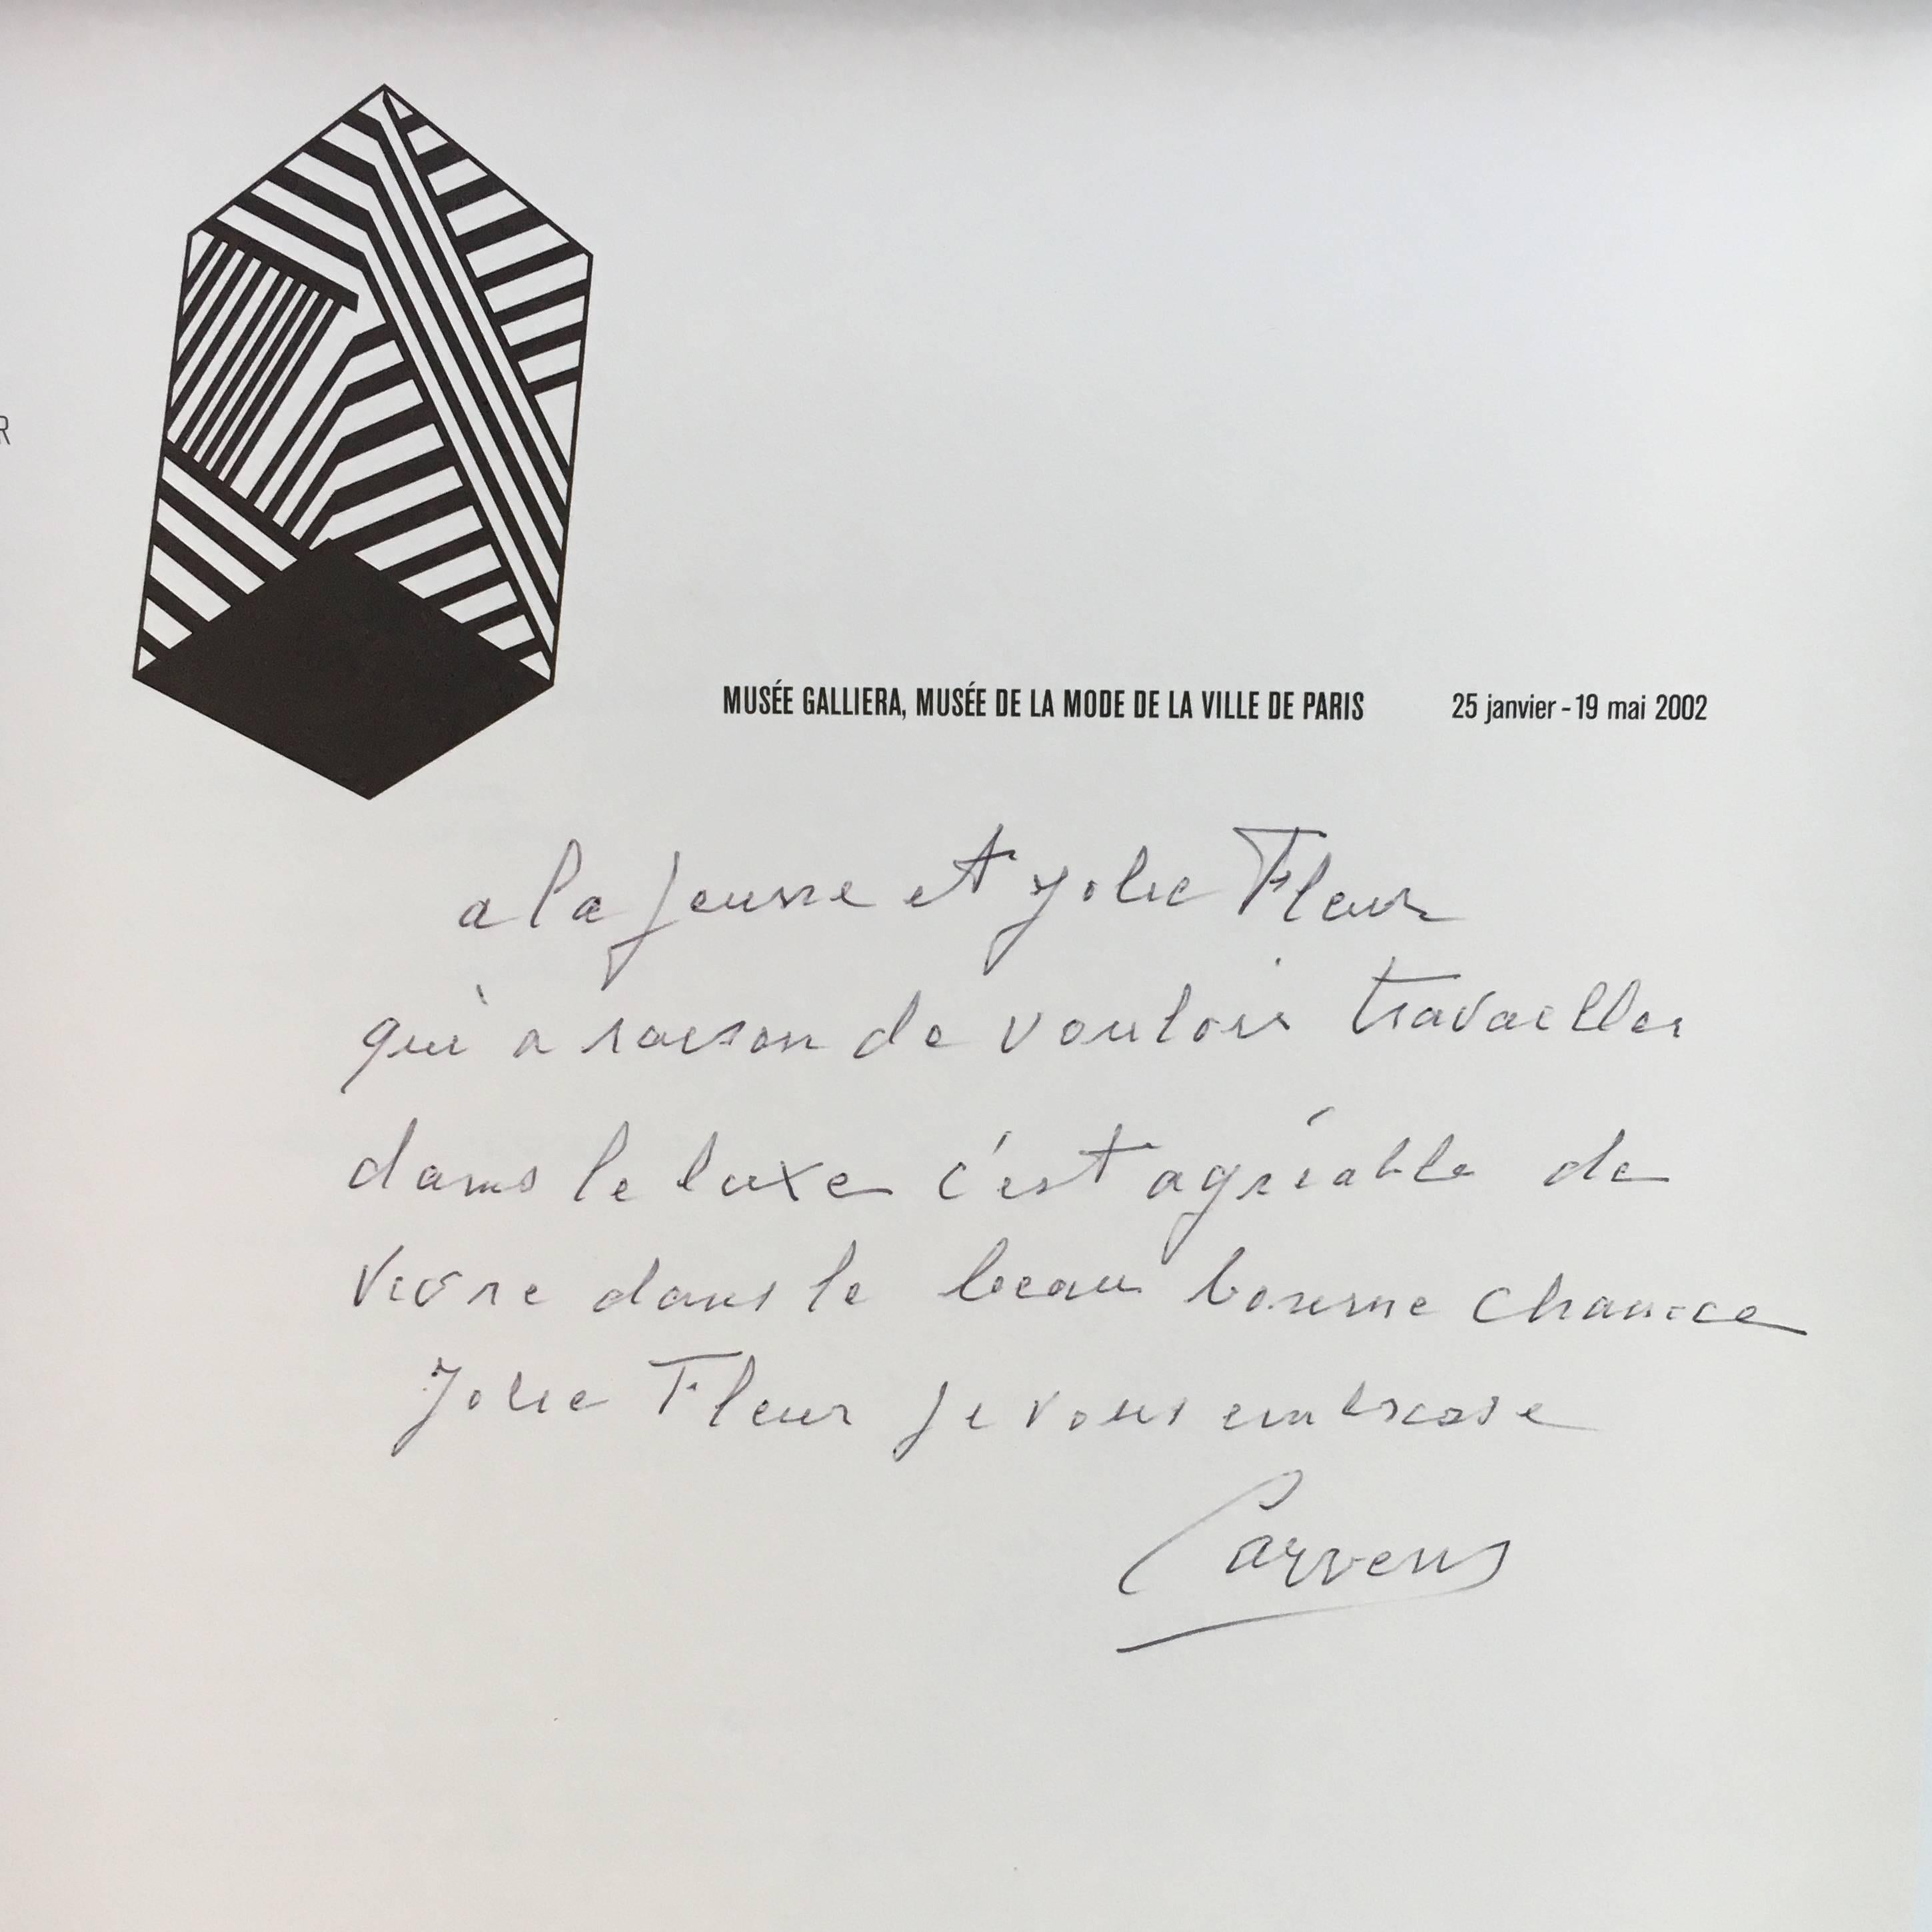 First edition, published by Paris-Muse´es association, 2002.

Signed copy by Madame Carven to a friend.

A catalogue for an exhibition held at Musee Galleria in 2002, tracing the history of the couture house Carven. It shows intimately Madame